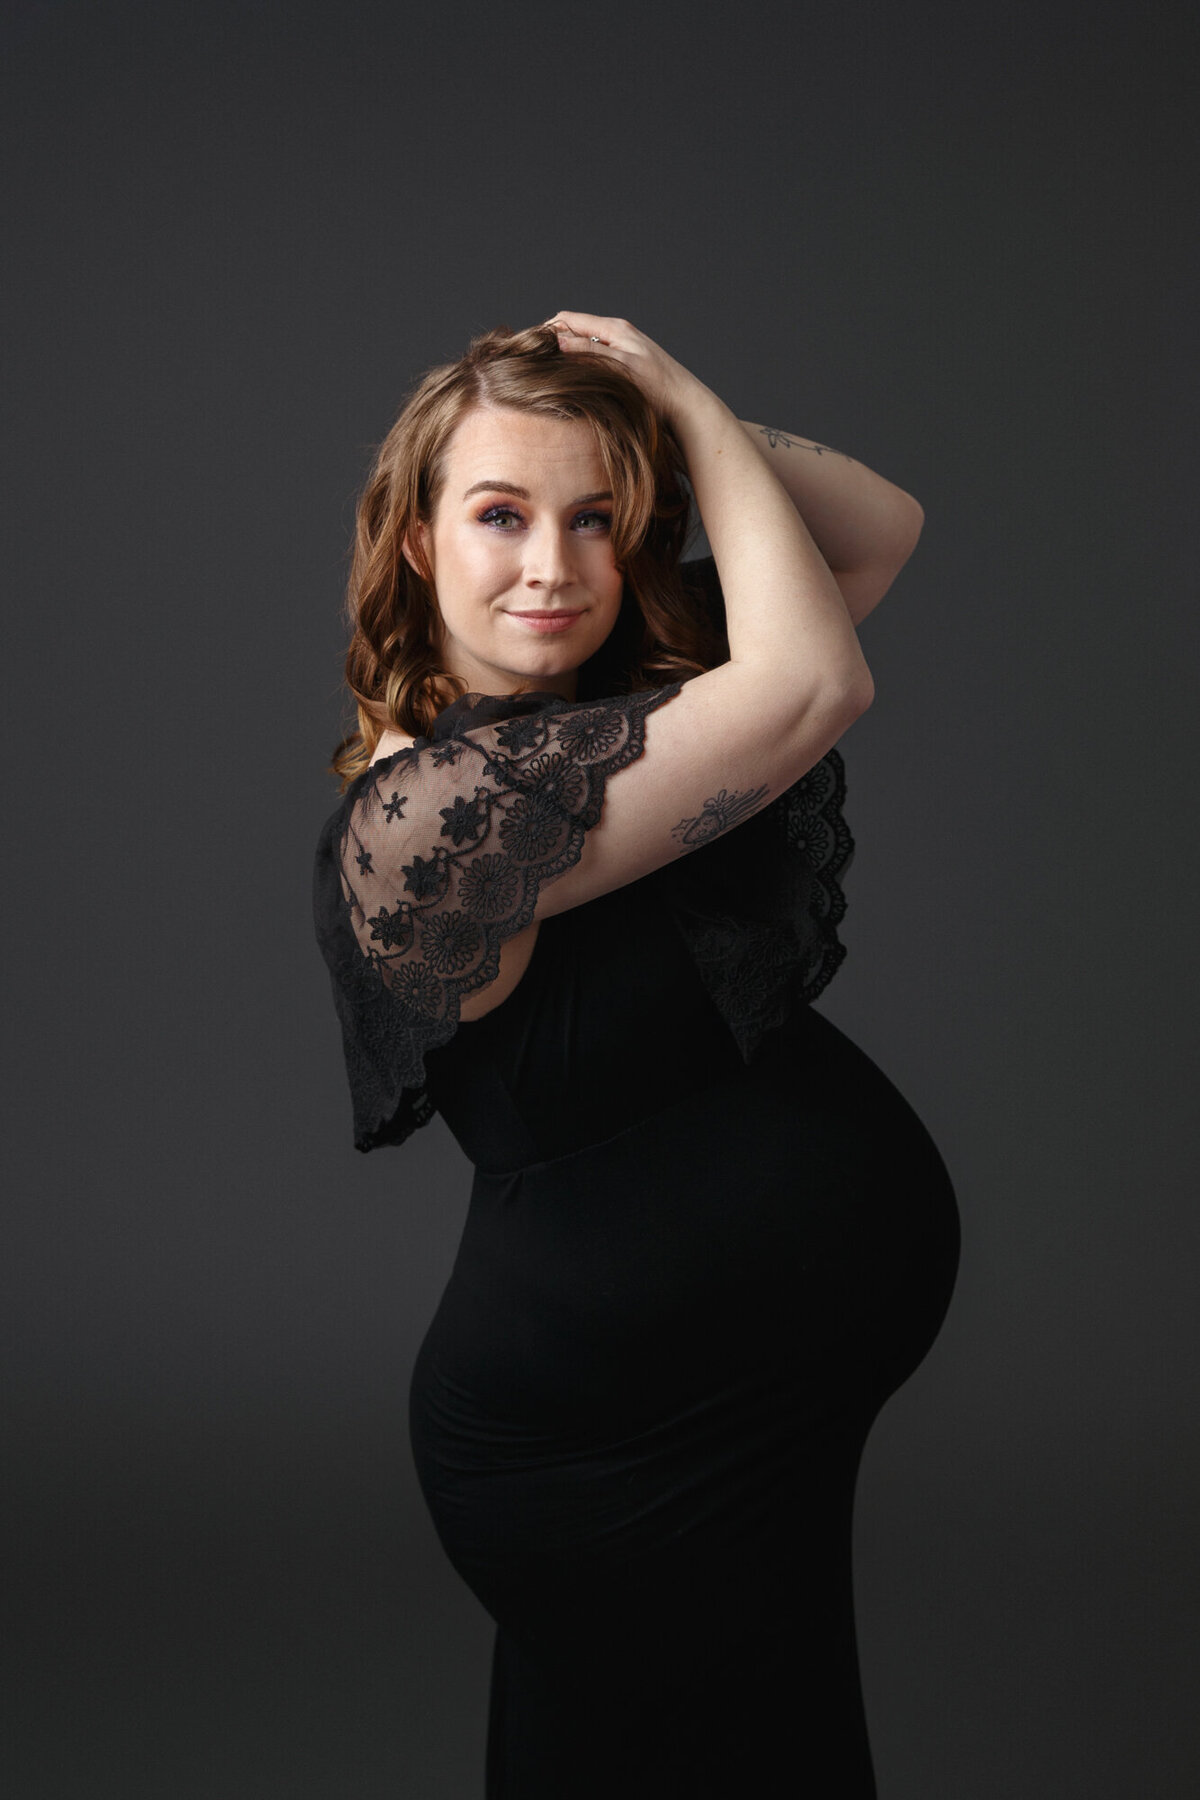 Professional portrait of a beautiful pregnant woman wearing a black dress with lace sleeves